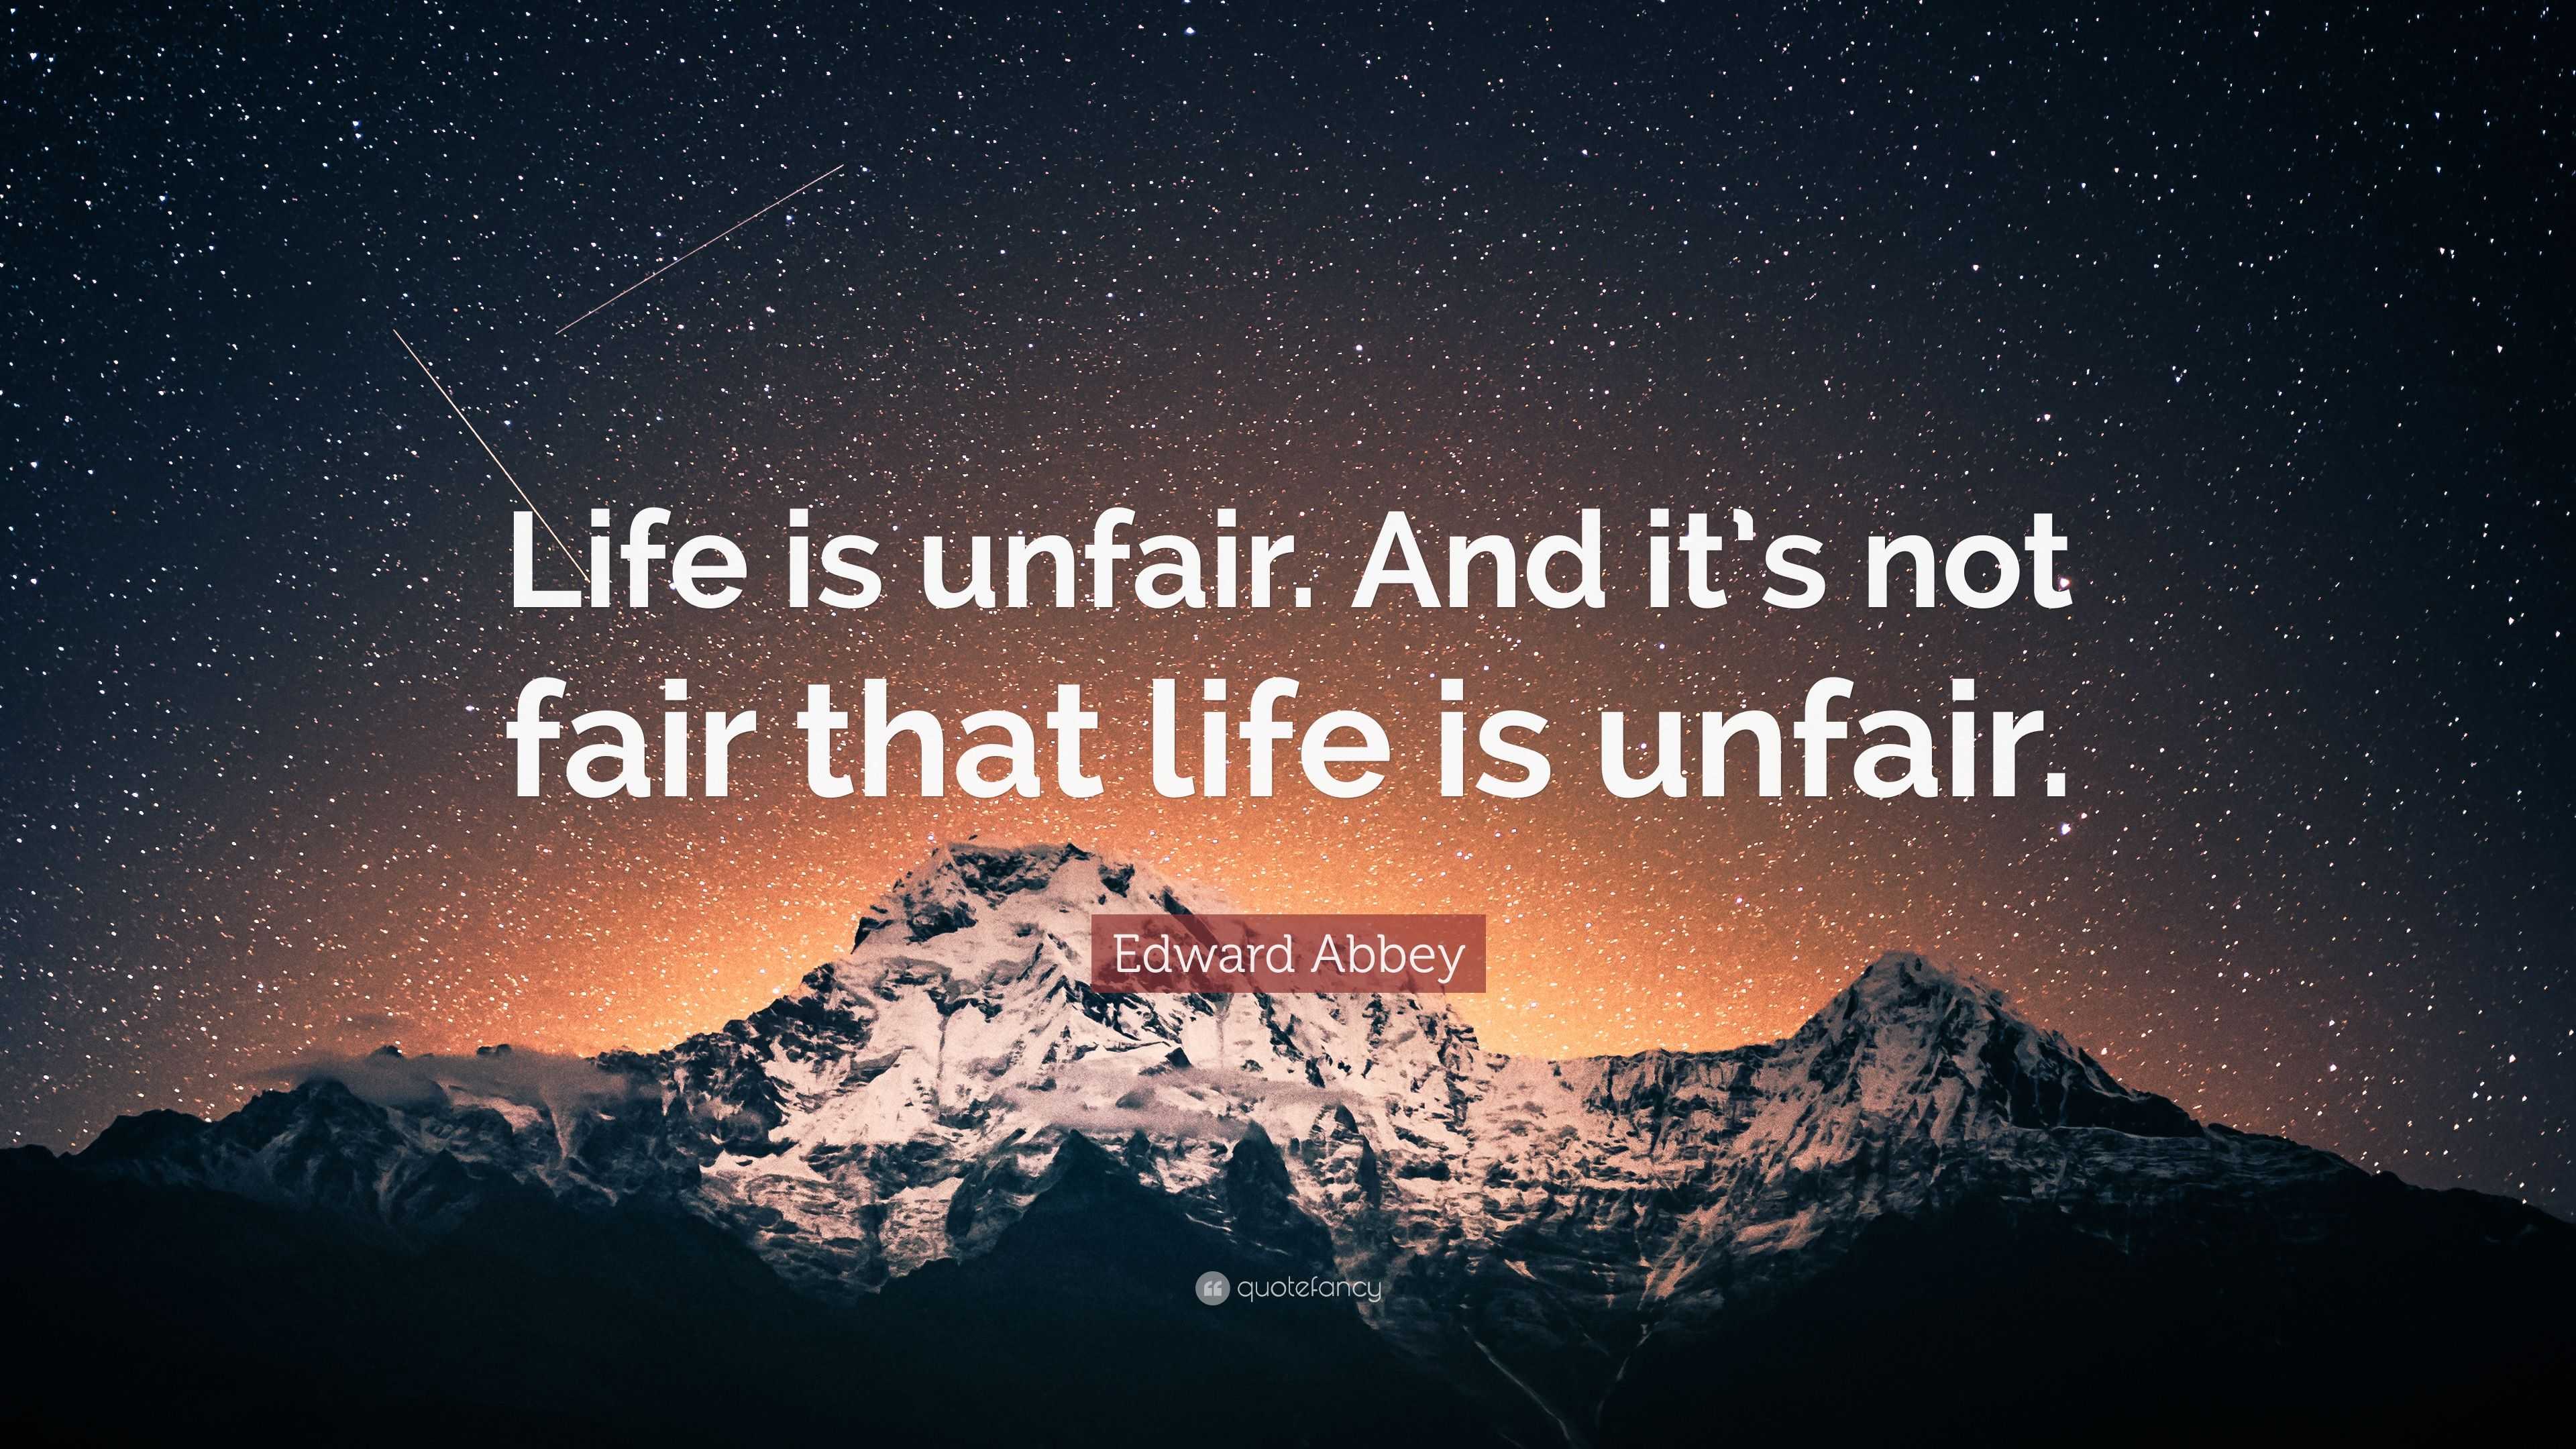 Edward Abbey Quote: “Life is unfair. And it’s not fair that life is